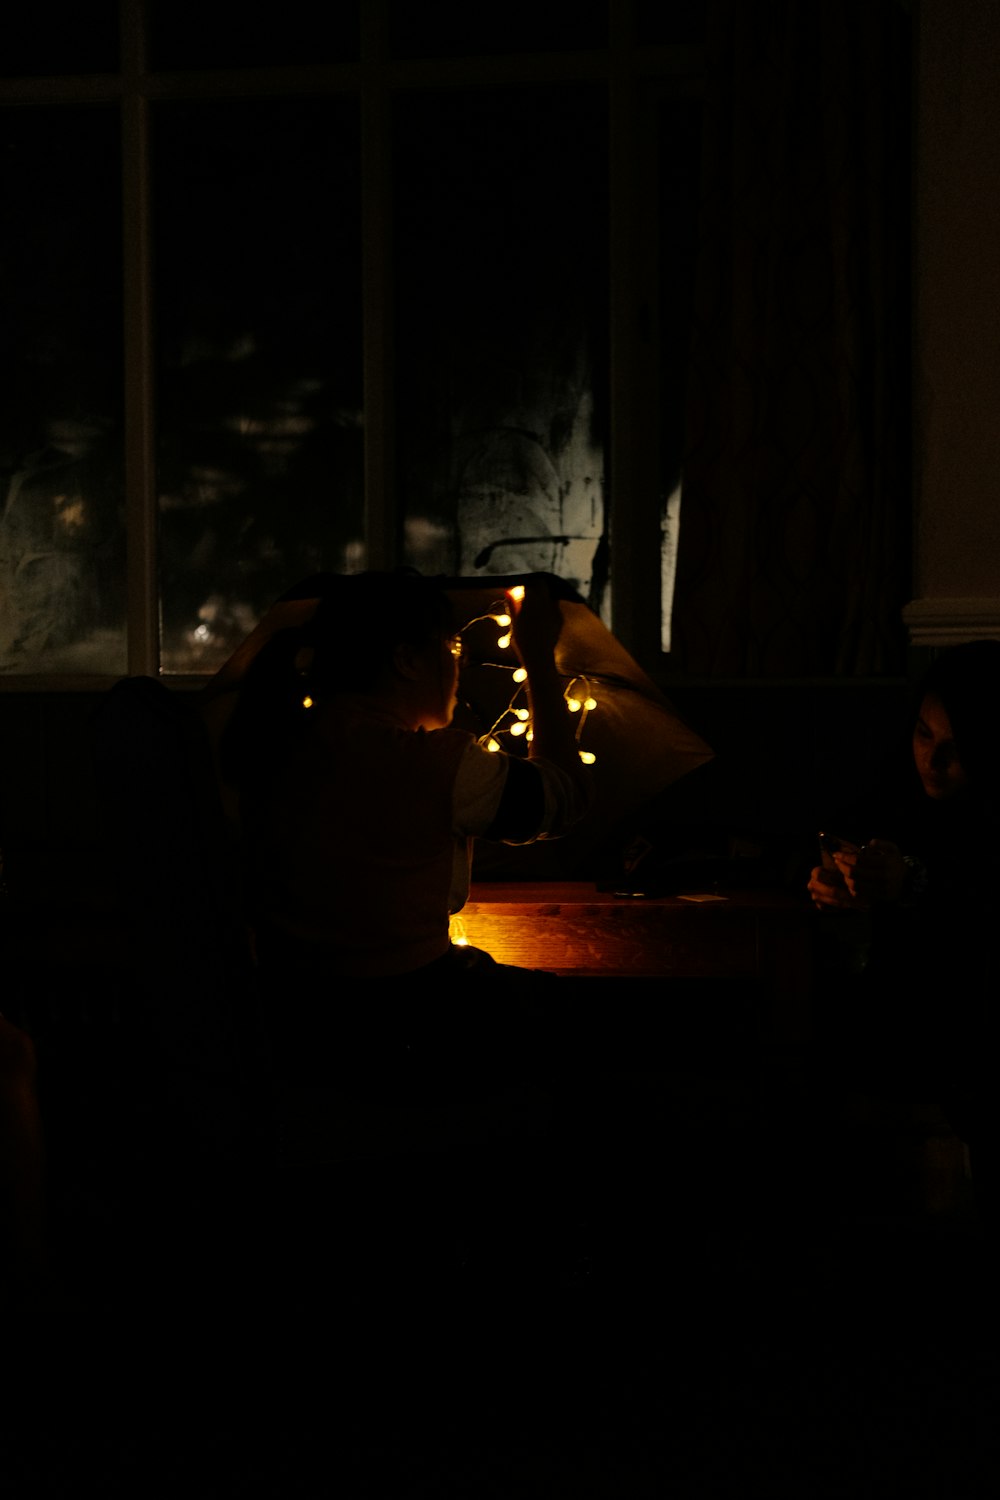 a person sitting on a couch in a dark room